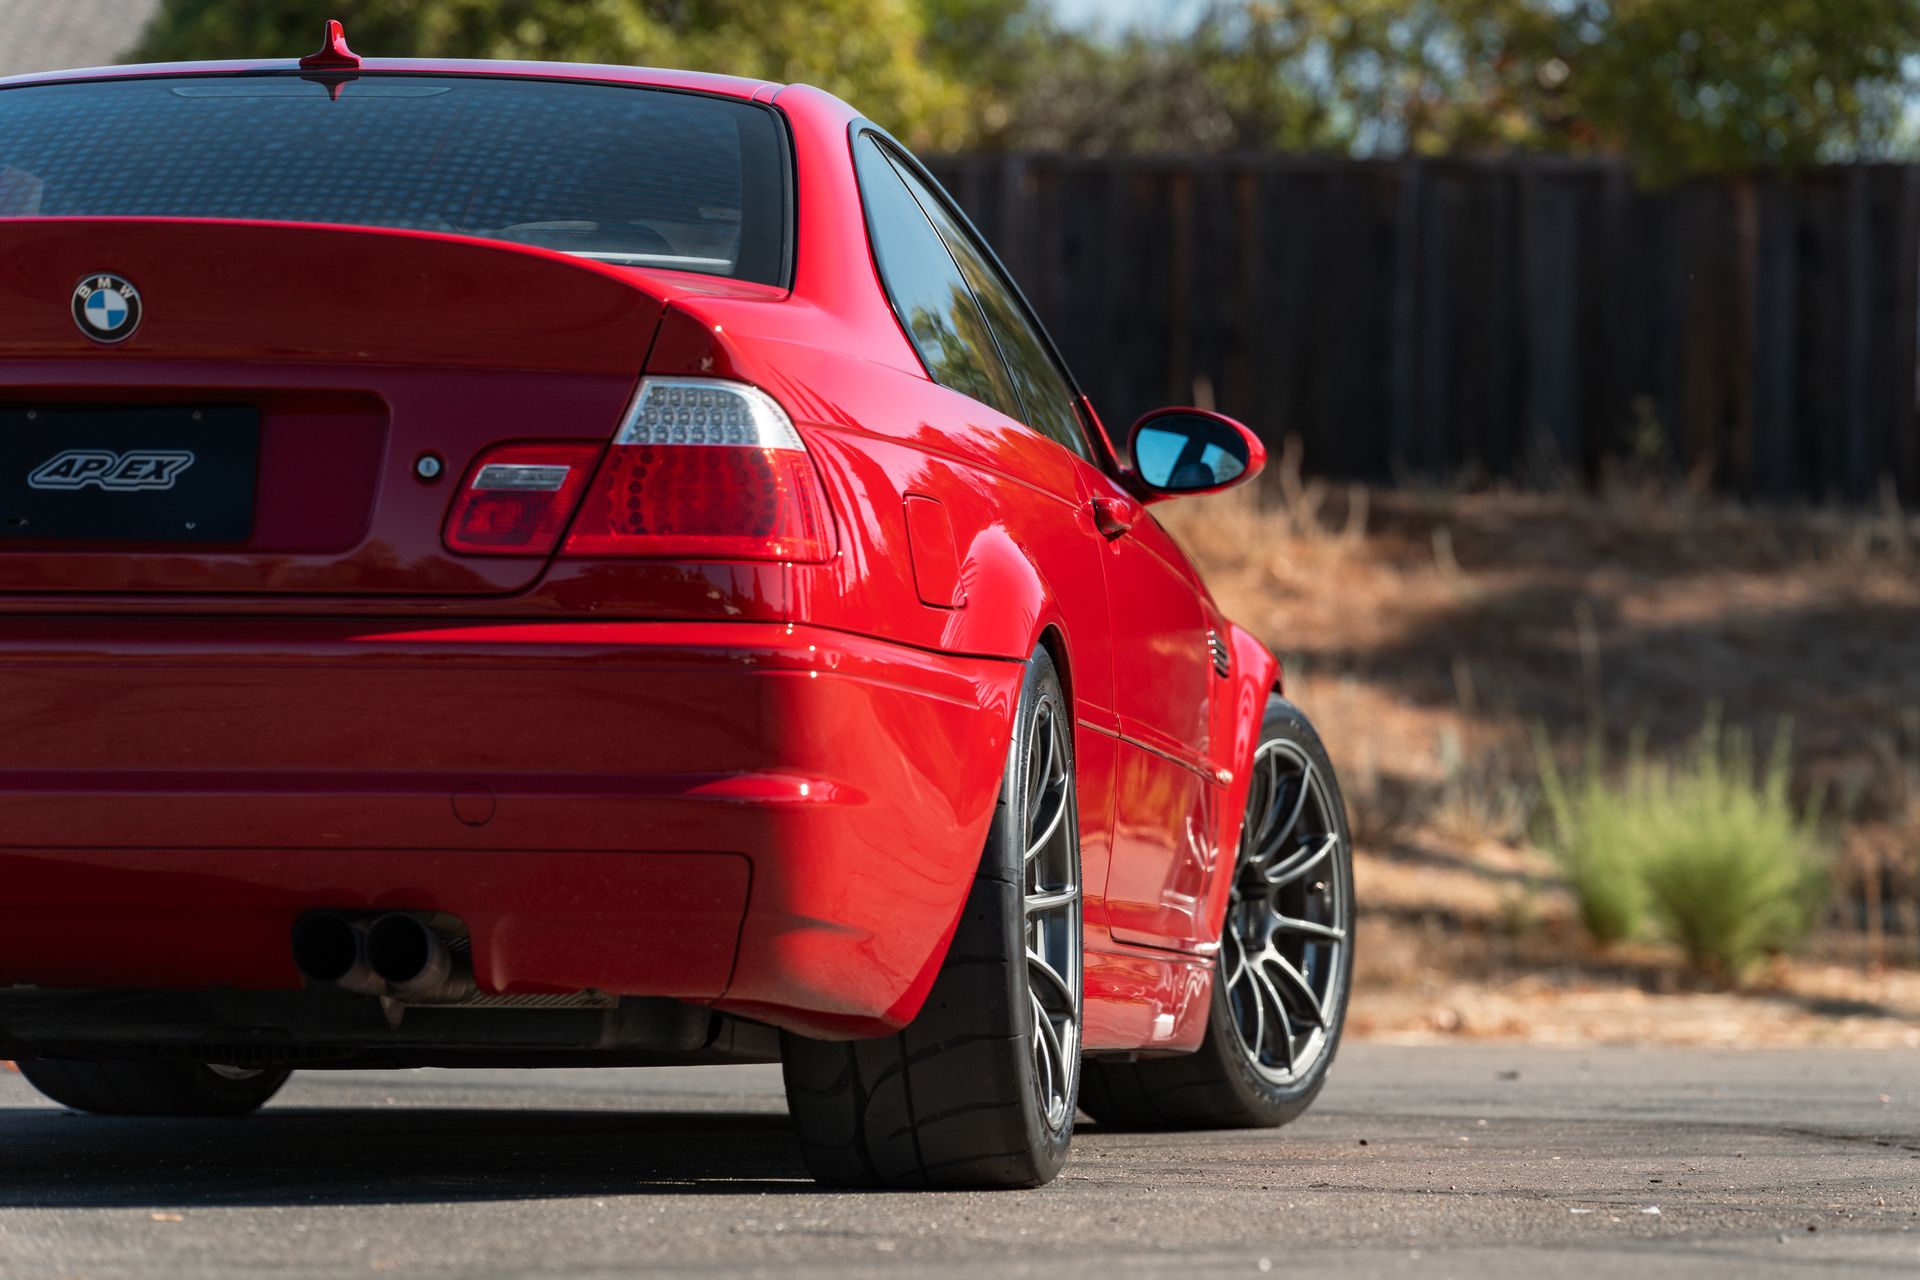 BMW E46 M3 with 18" SM-10RS in Anthracite